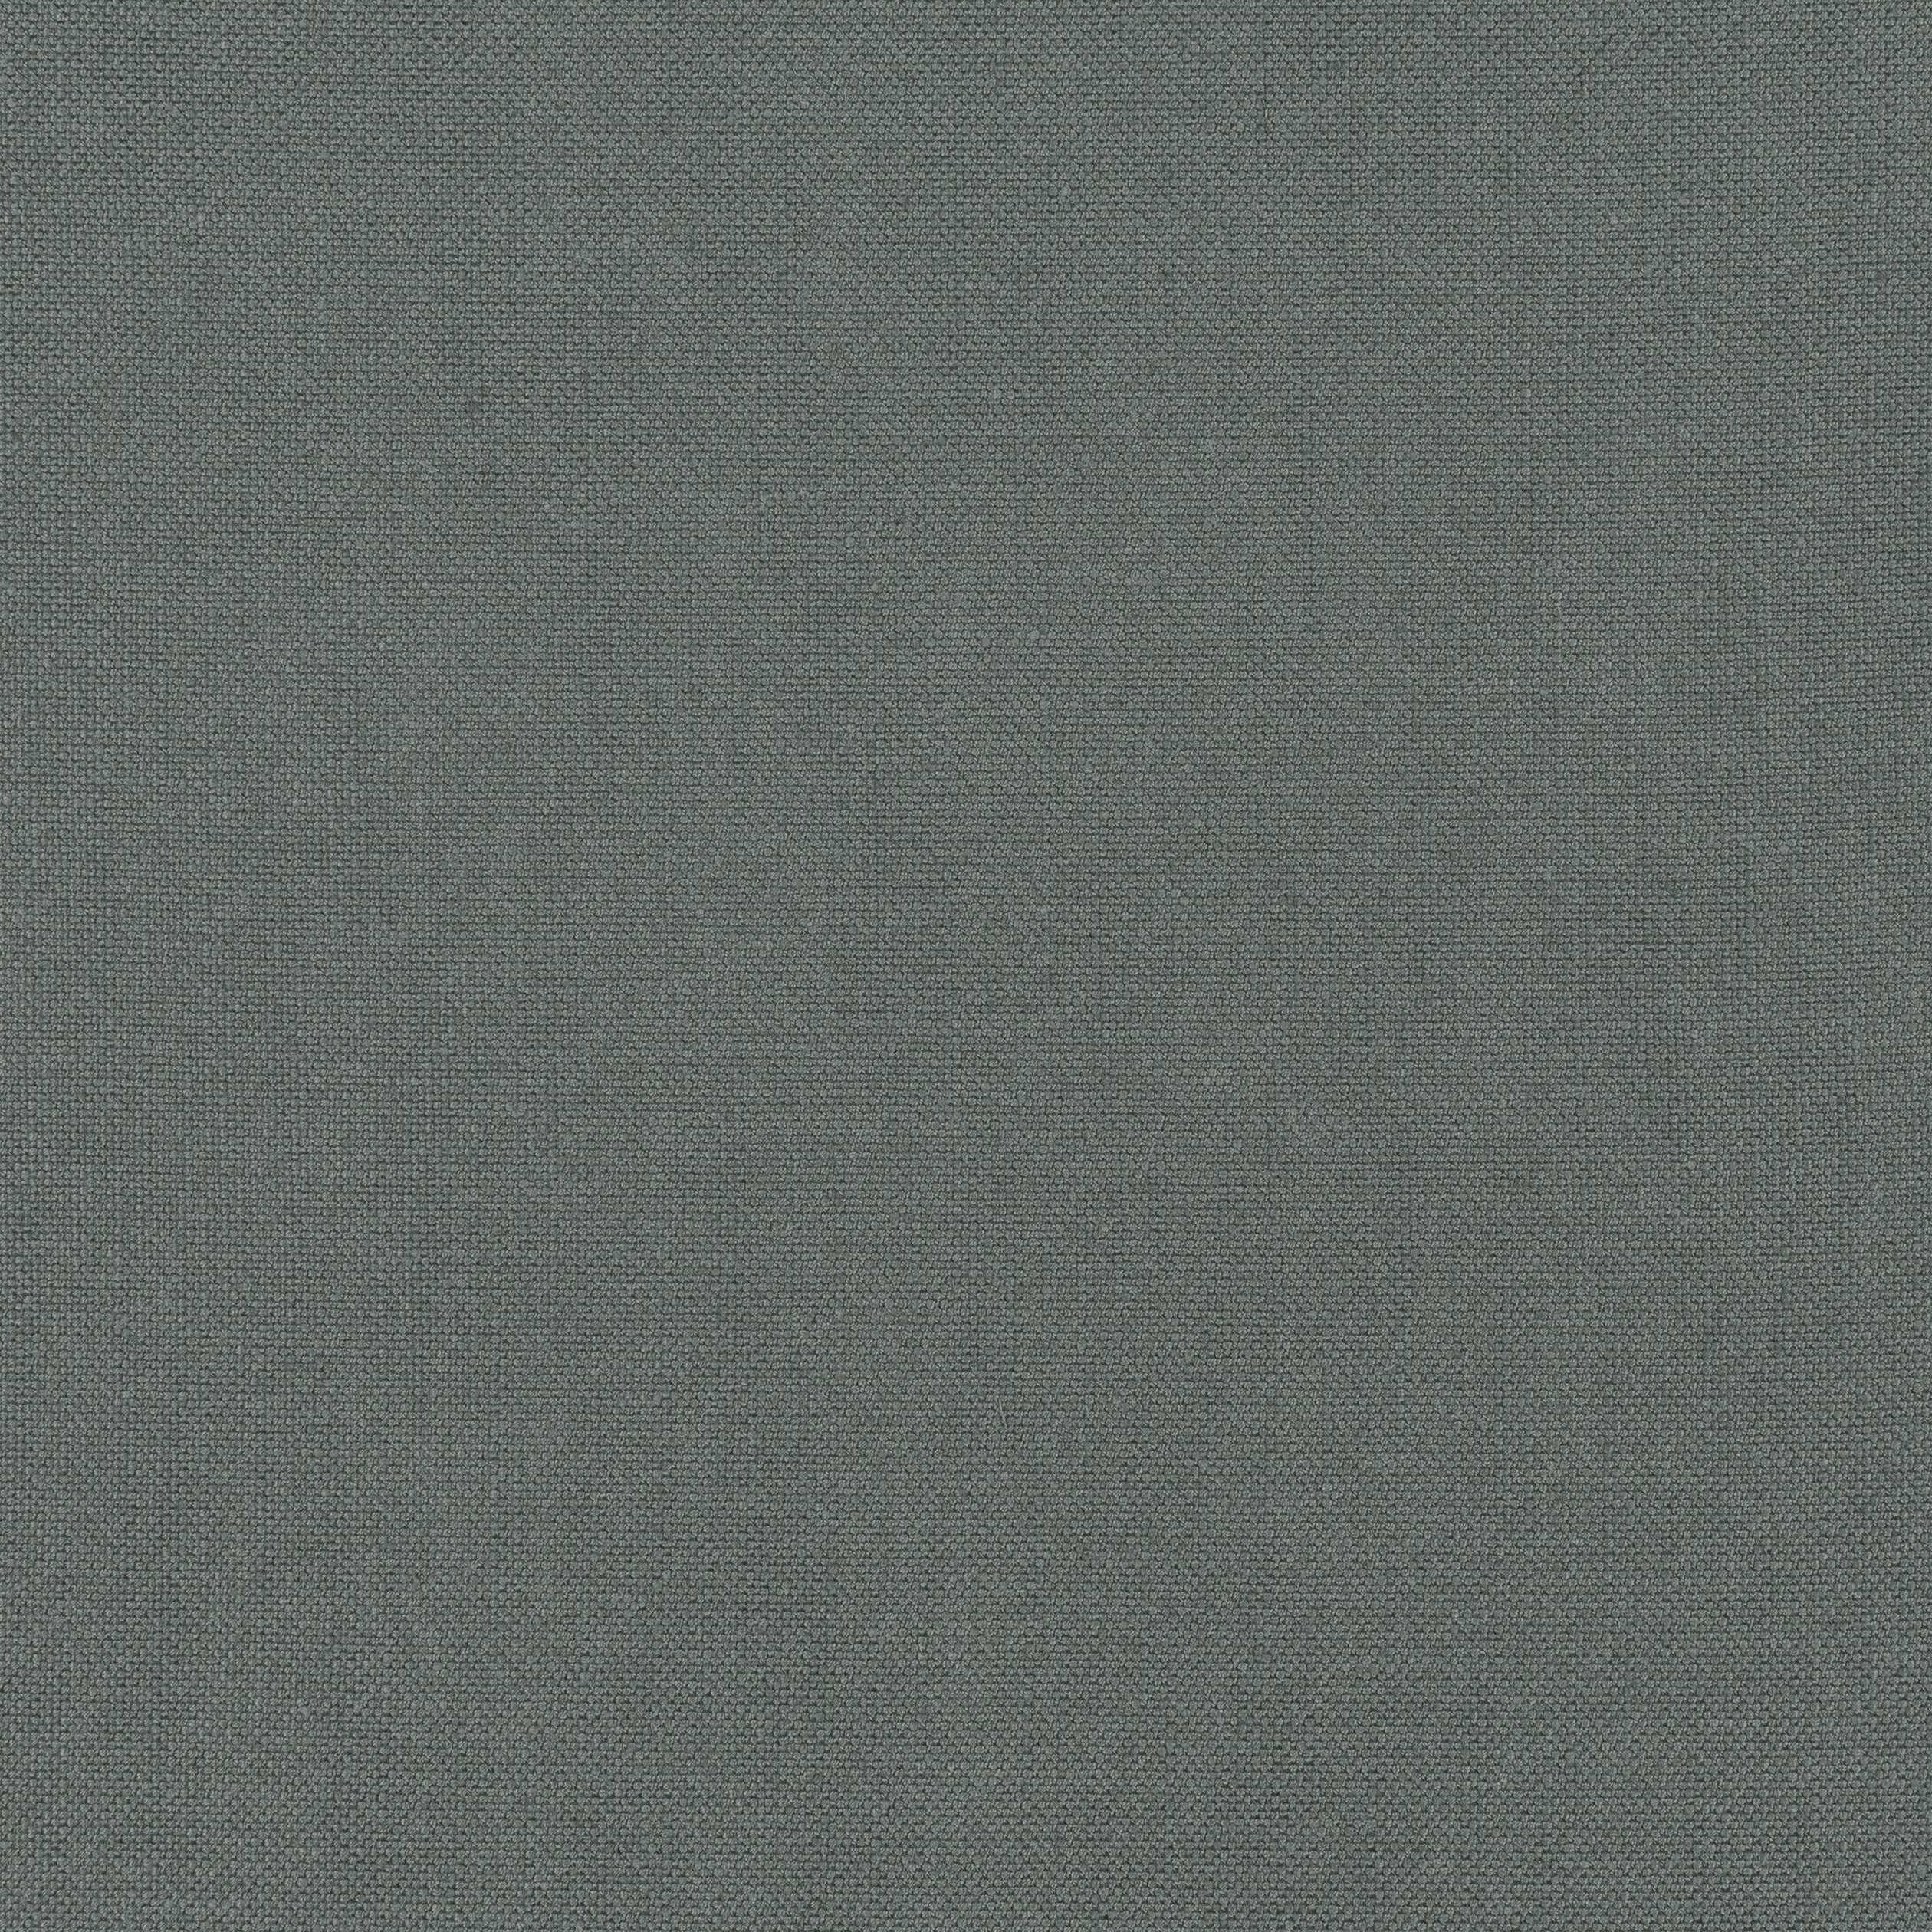 Palisade Linen fabric in charcoal color - pattern number FWW7662 - by Thibaut in the Palisades collection